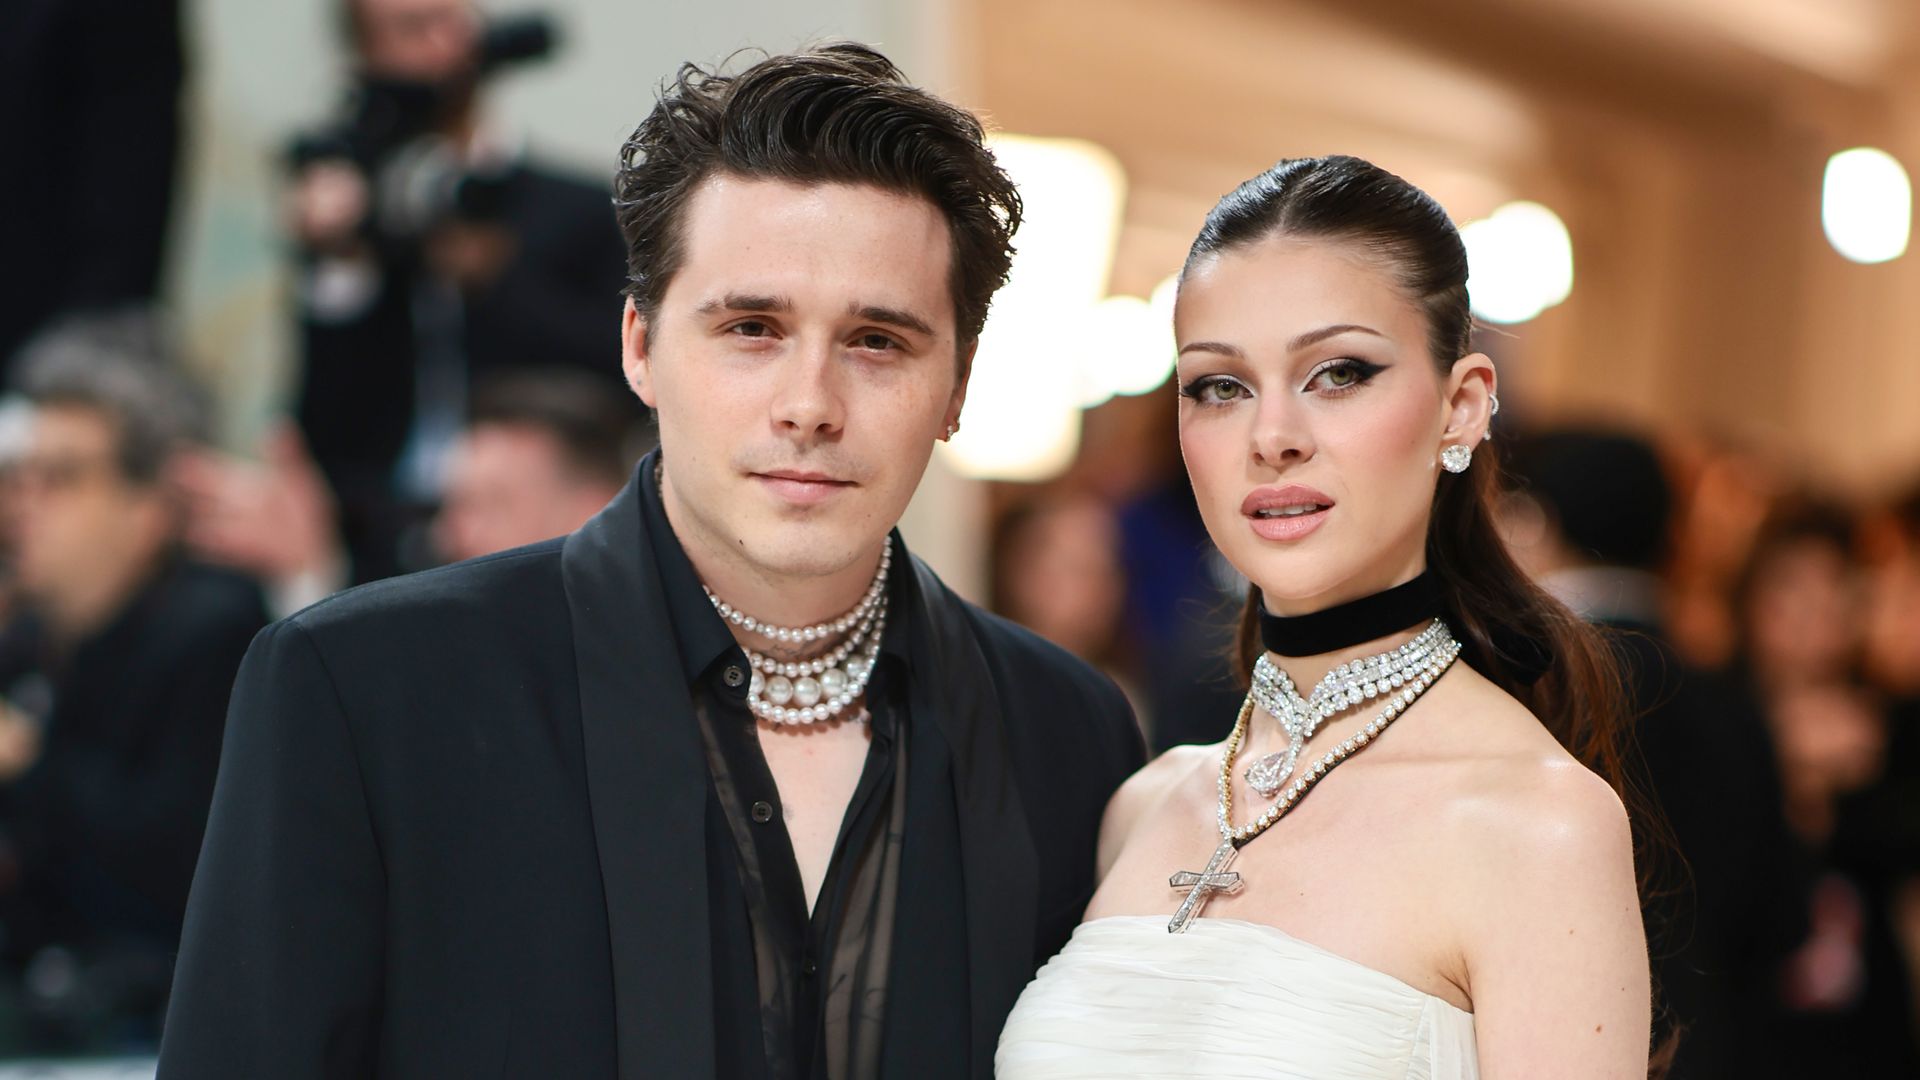 Brooklyn Beckham and Nicola Peltz both opted for Valentino